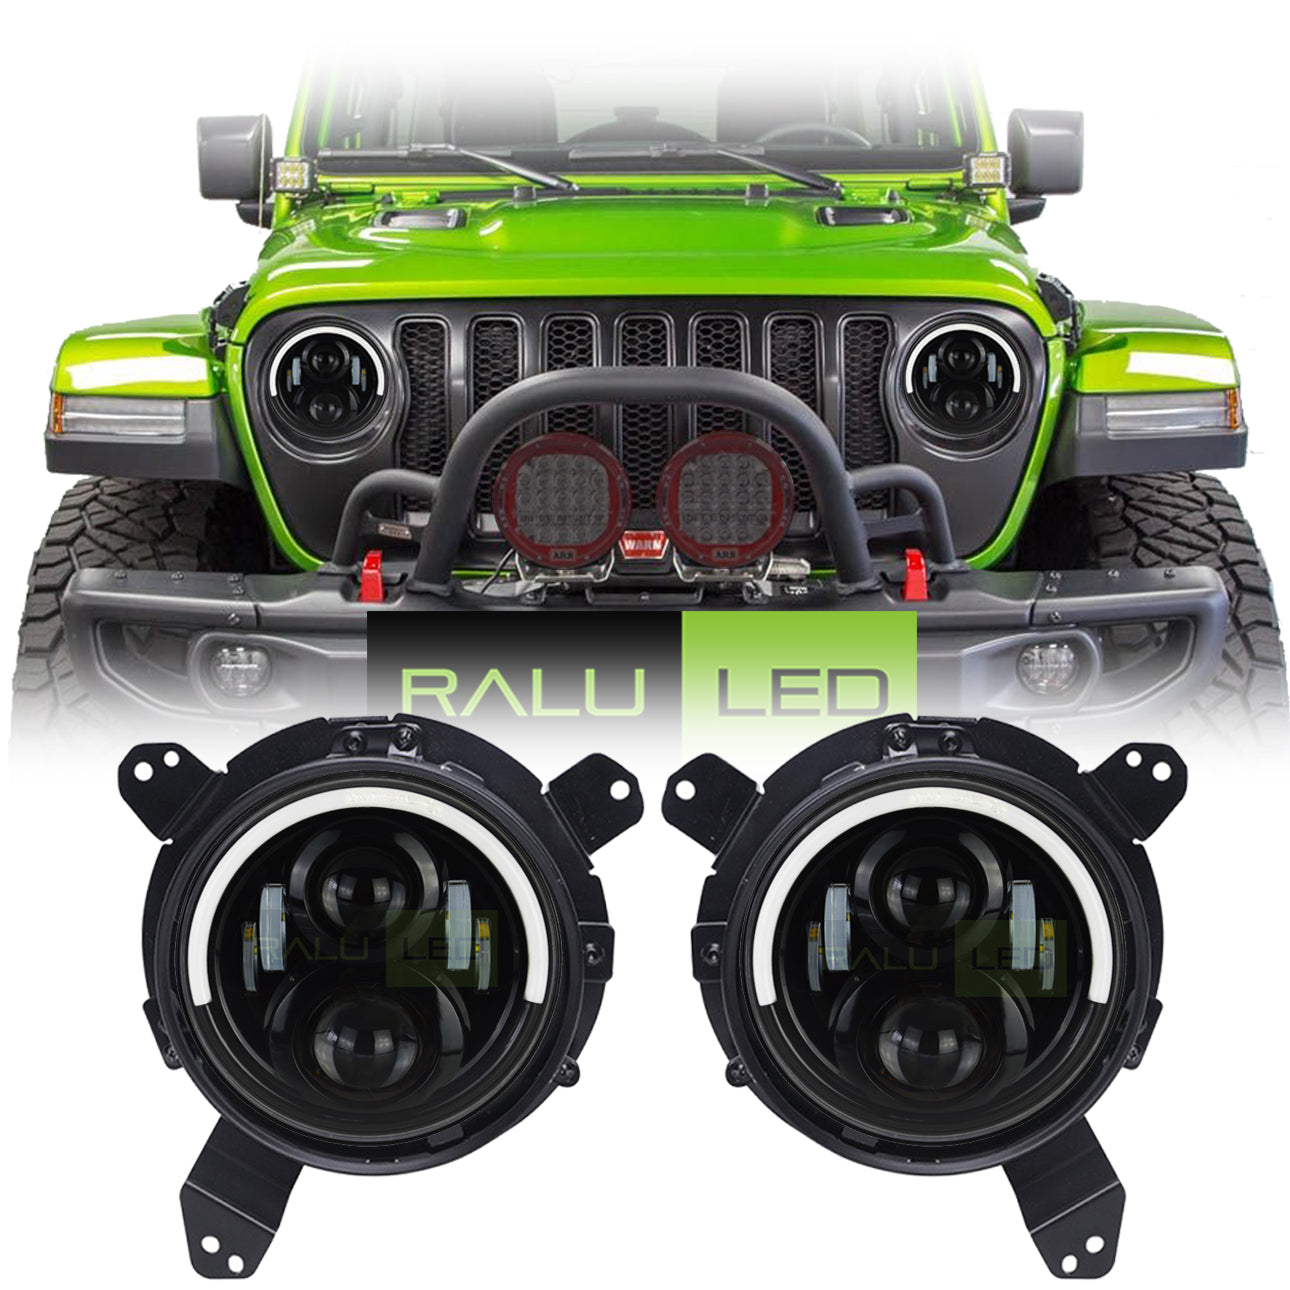 Best Led Headlights For Jeep Wrangler Store, SAVE 58%.